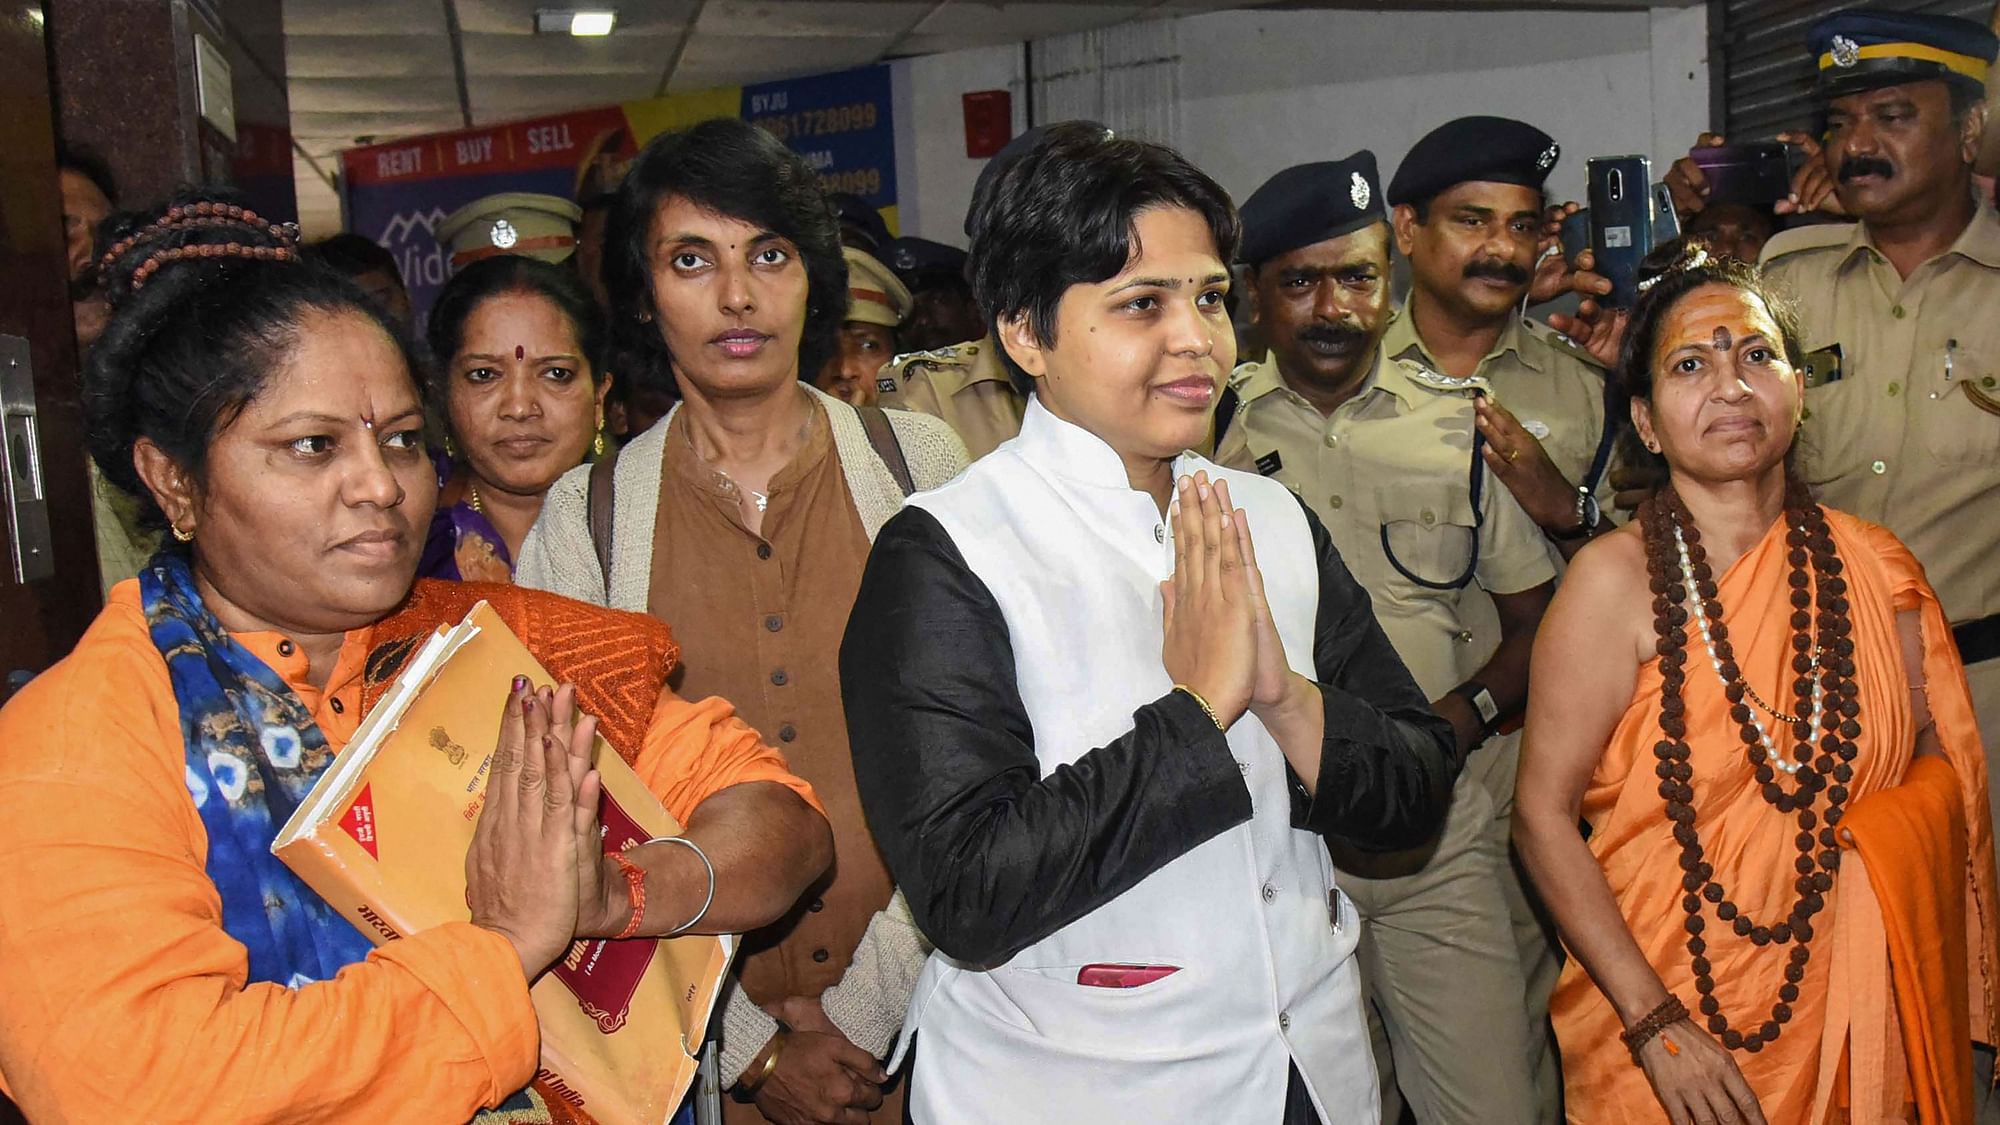 Pune-based activist Trupti Desai comes out from Kochi Commissionerate Office after the cancellation of their pilgrimage to Sabarimala.